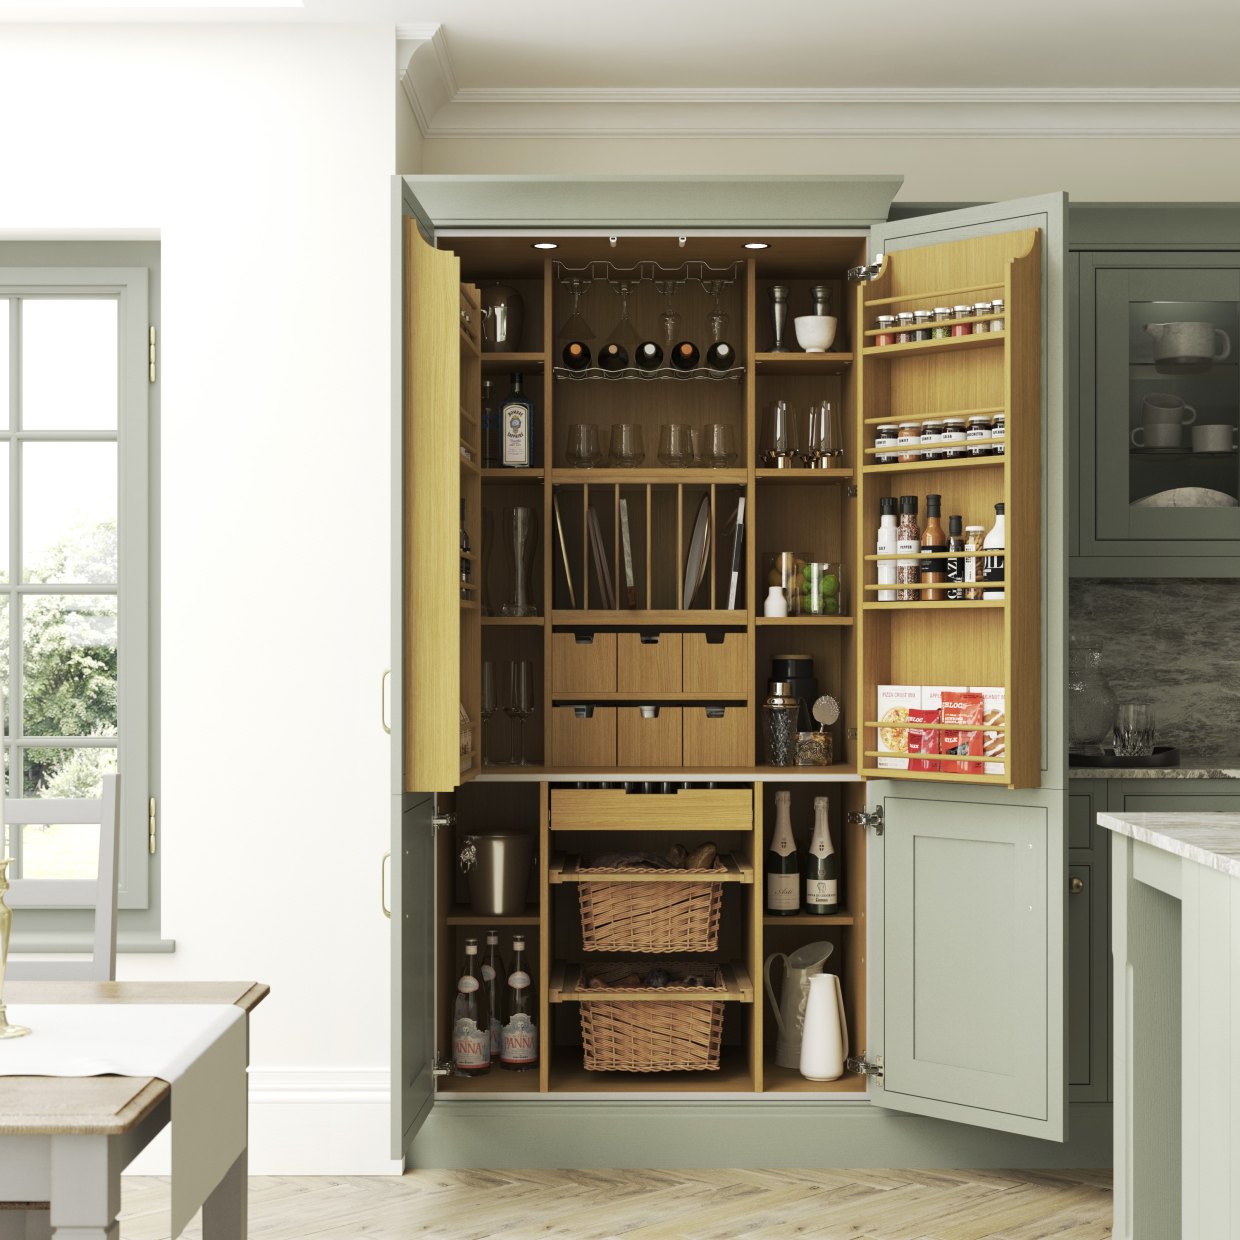 How to design your dream pantry – even if you’re short on space